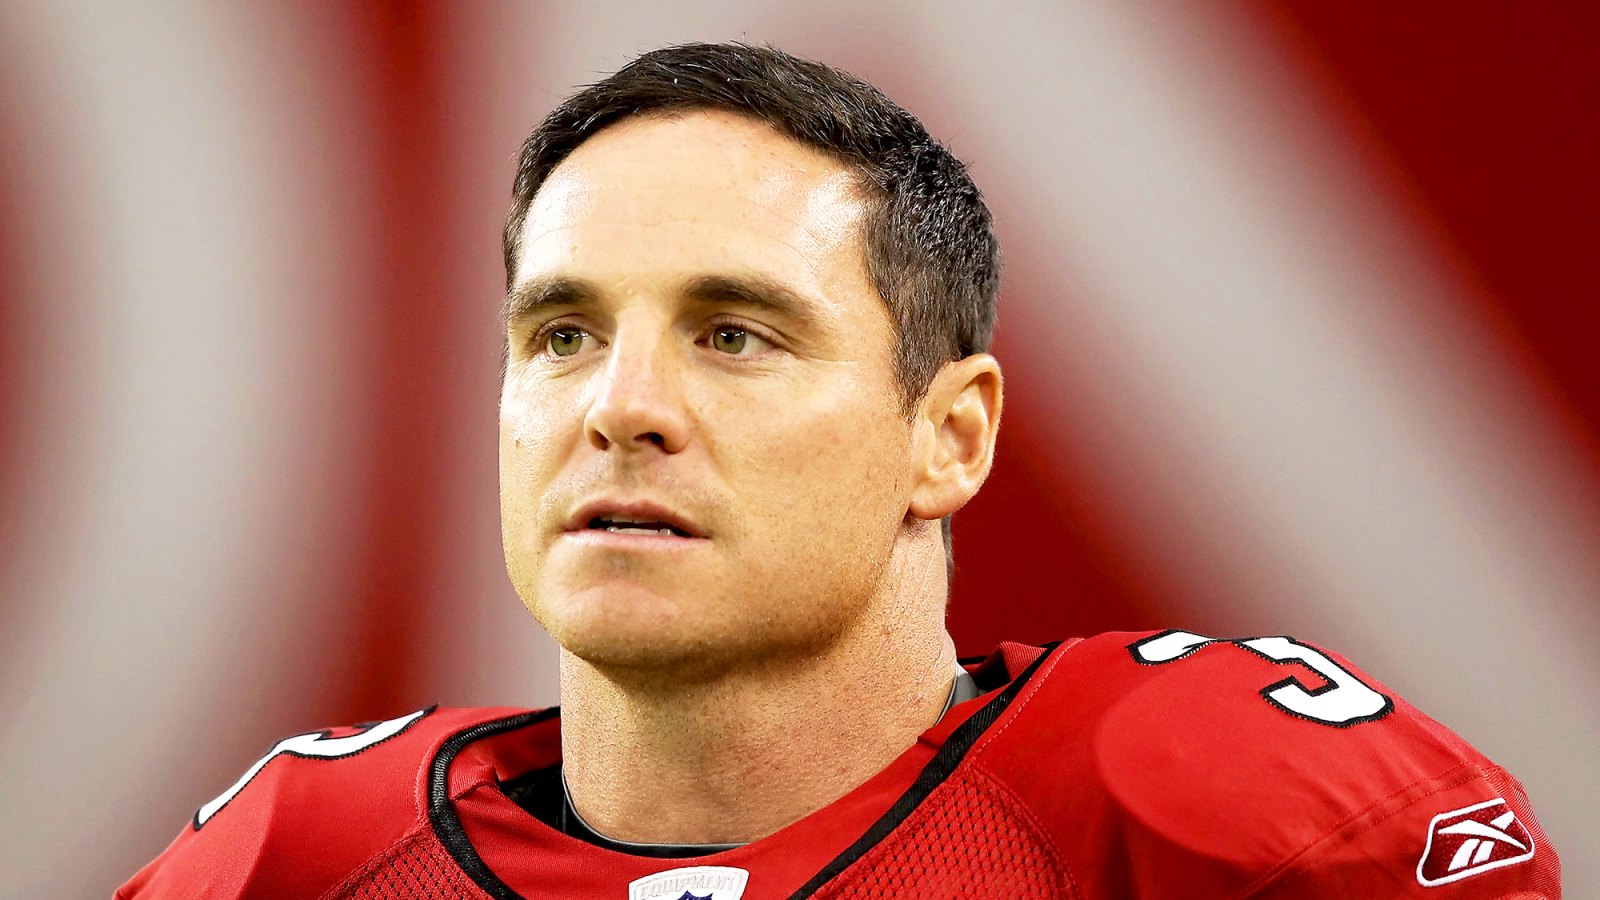 Jay Feely during the preseason NFL game against the San Diego Chargers at the University of Phoenix Stadium on August 27, 2011 in Glendale, Arizona.